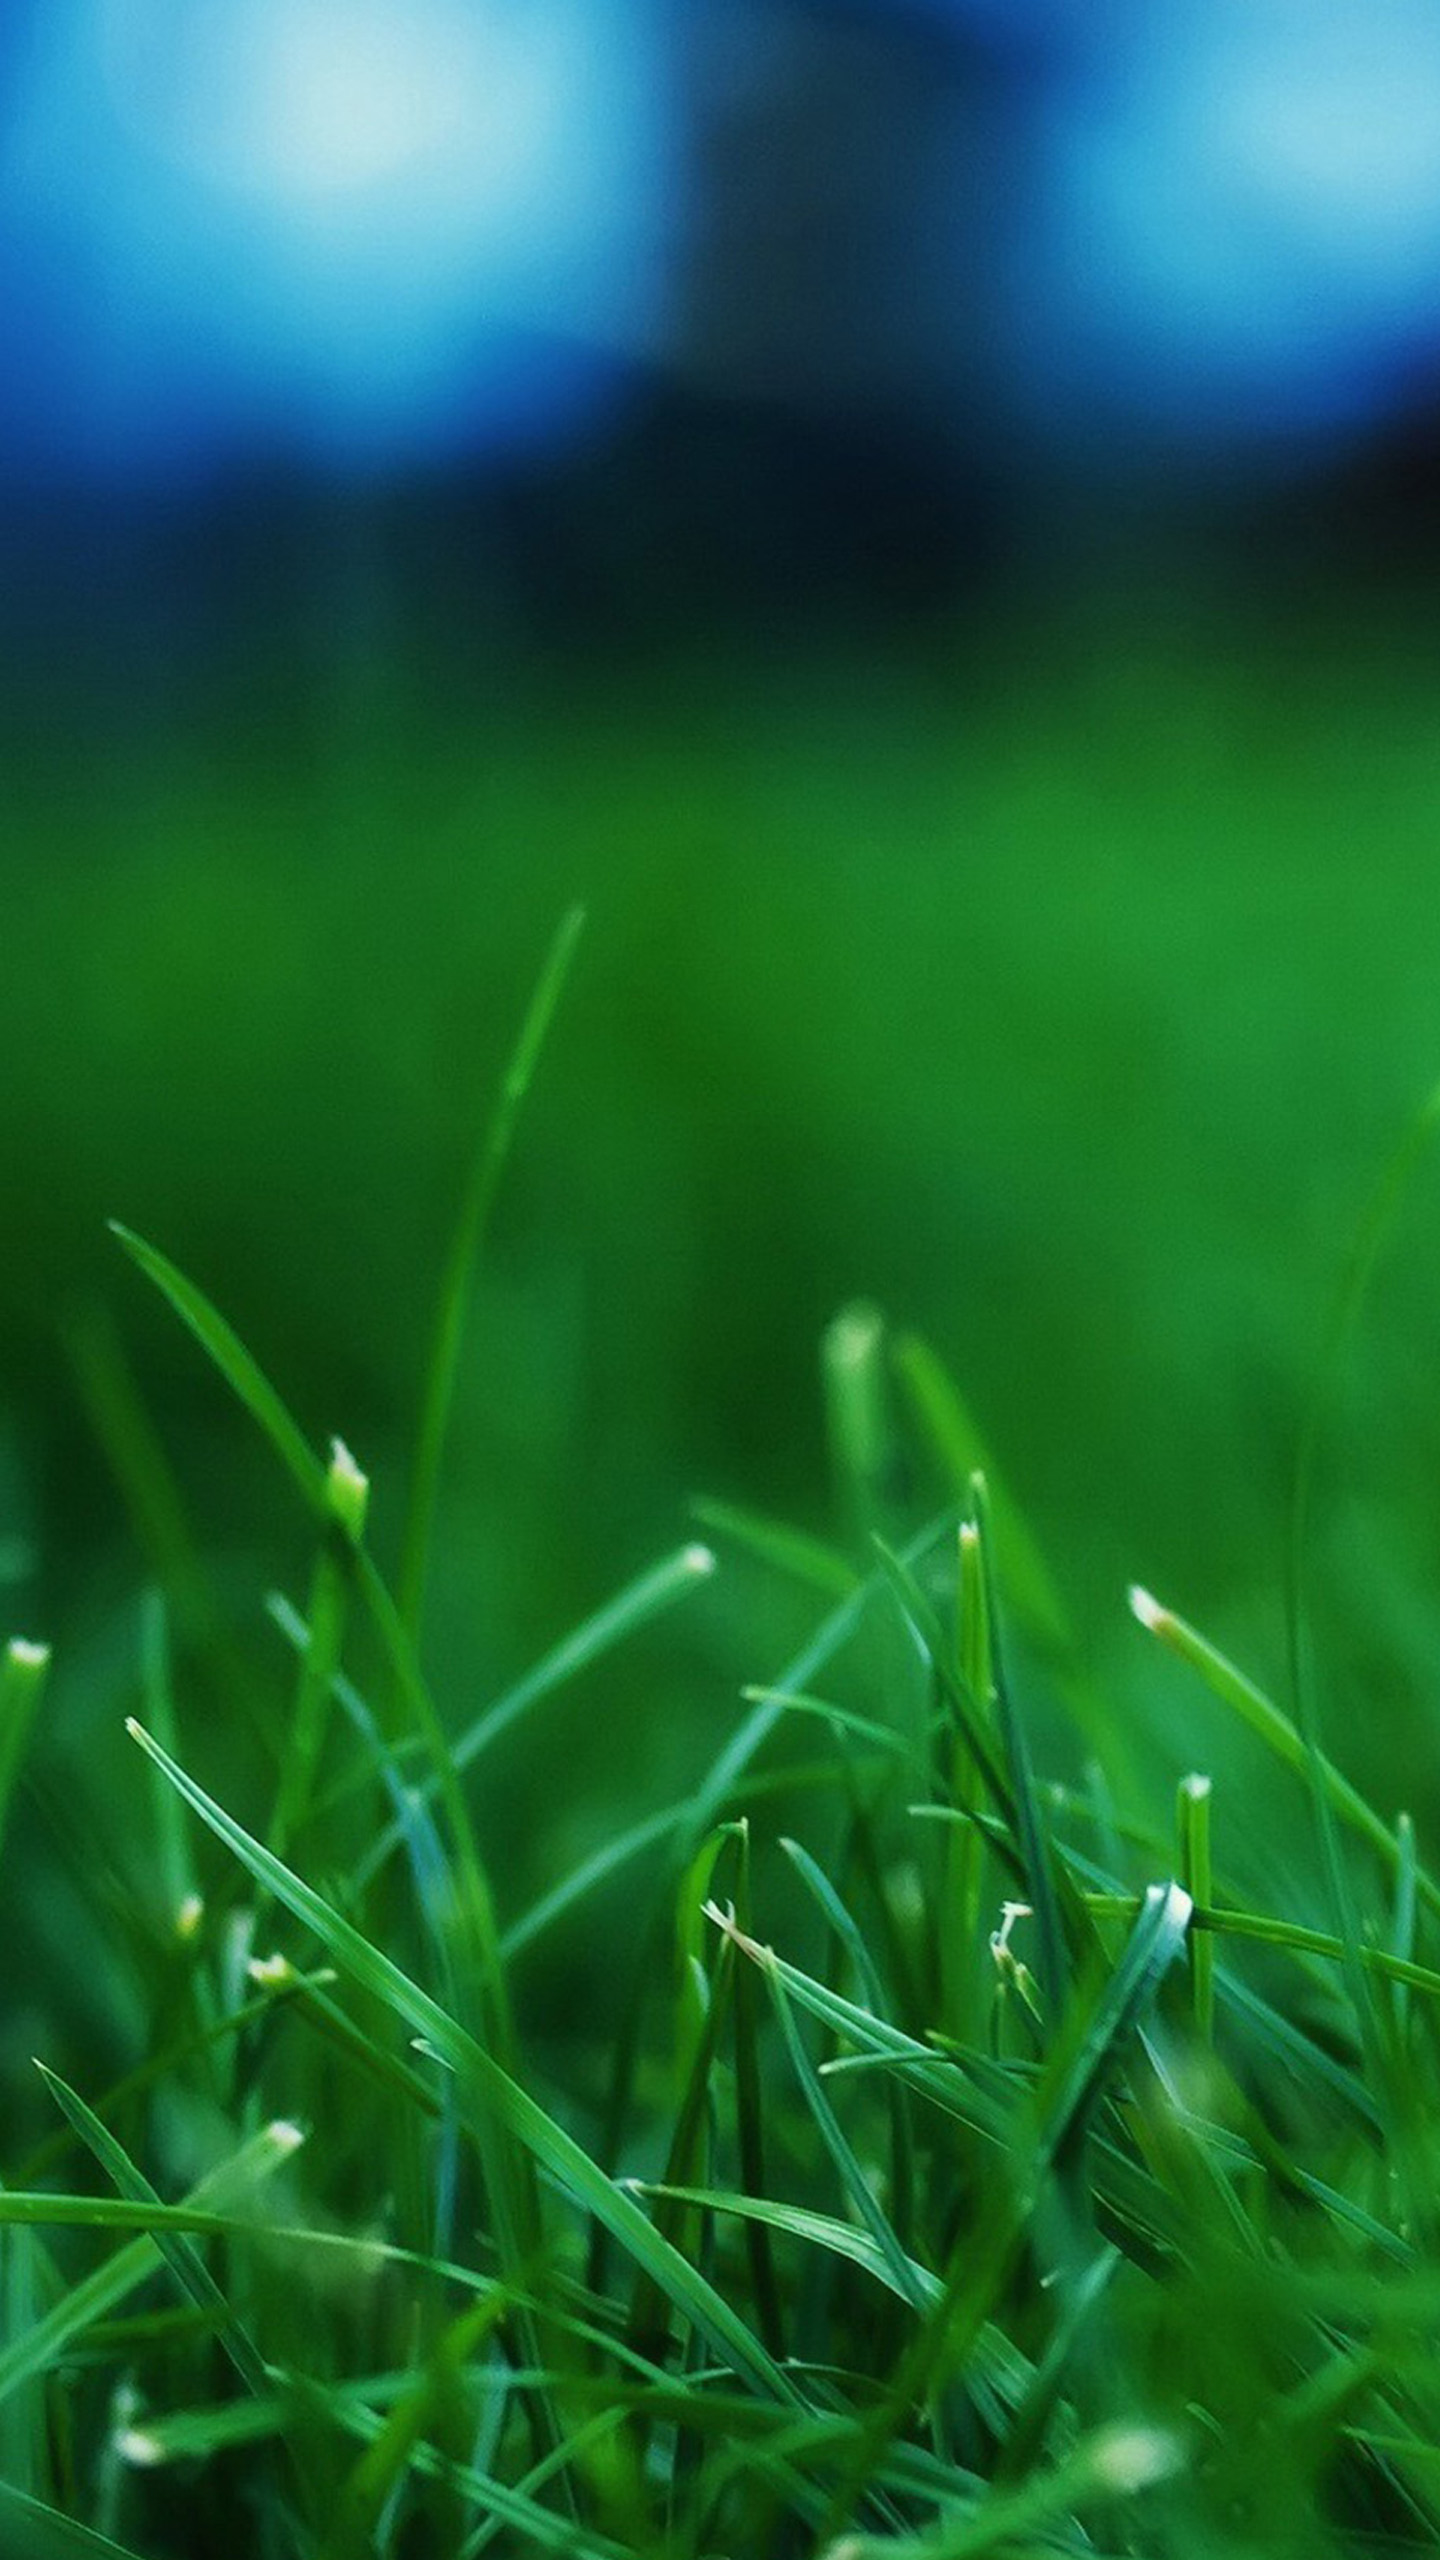 Plant LG G3 Wallpapers HD